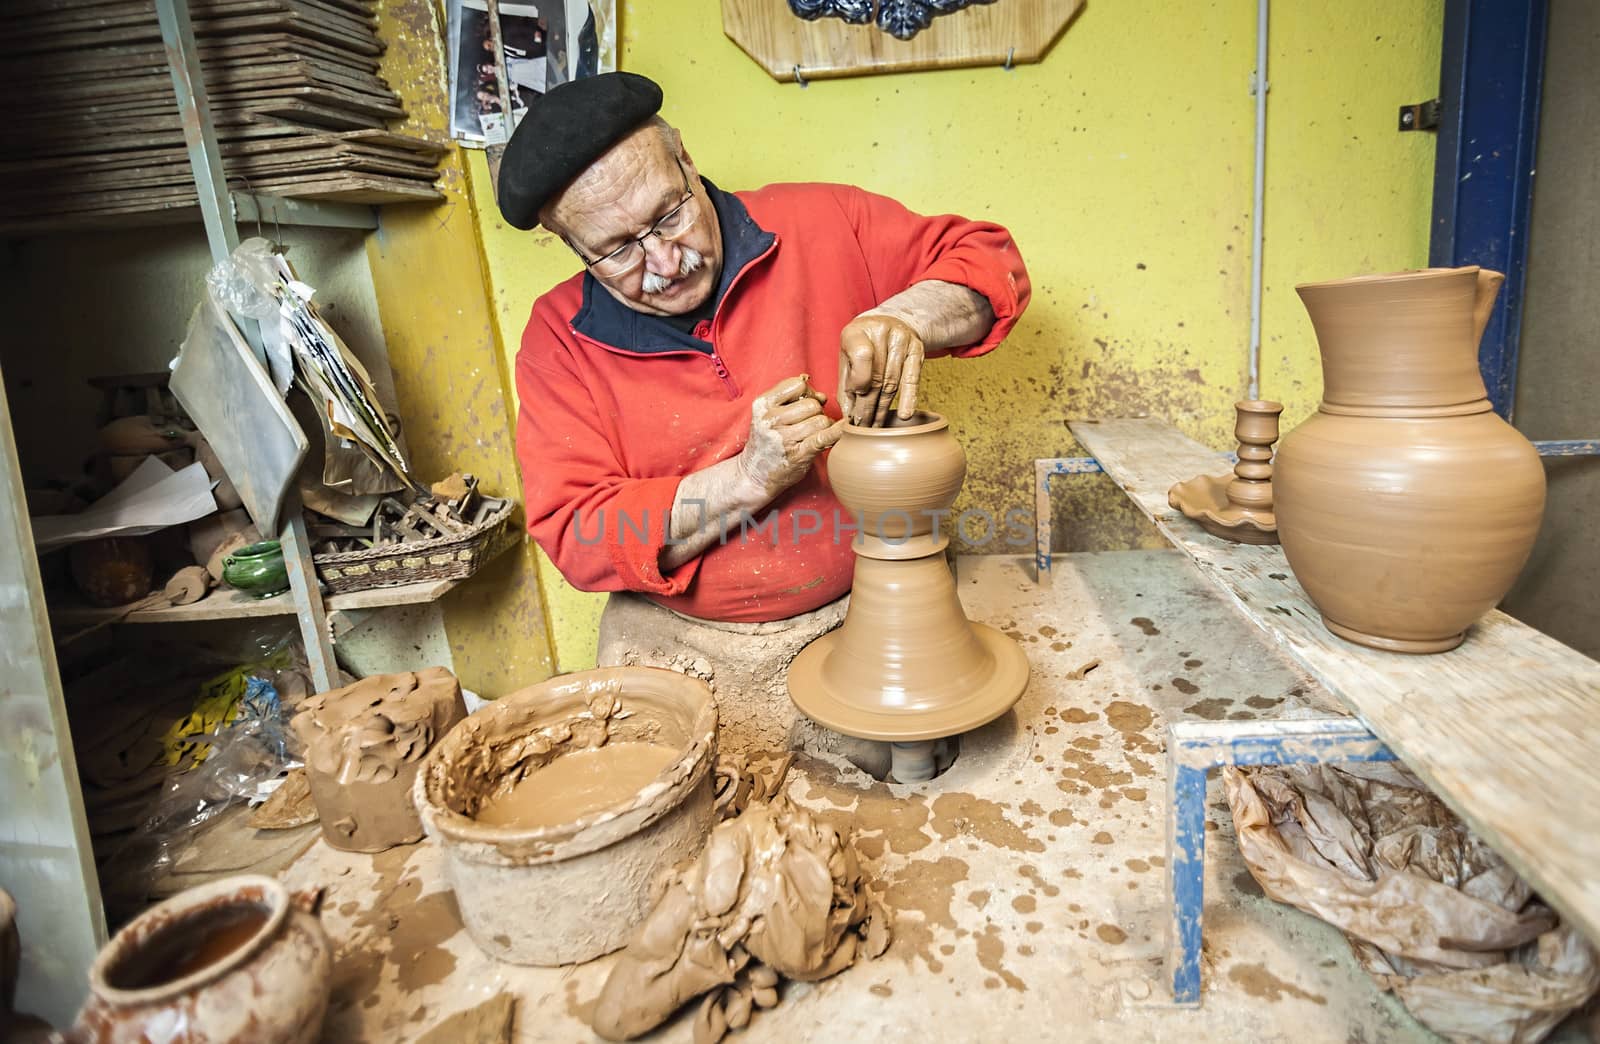 Potter working in workshop a ceramic piece typical of Bailen by digicomphoto